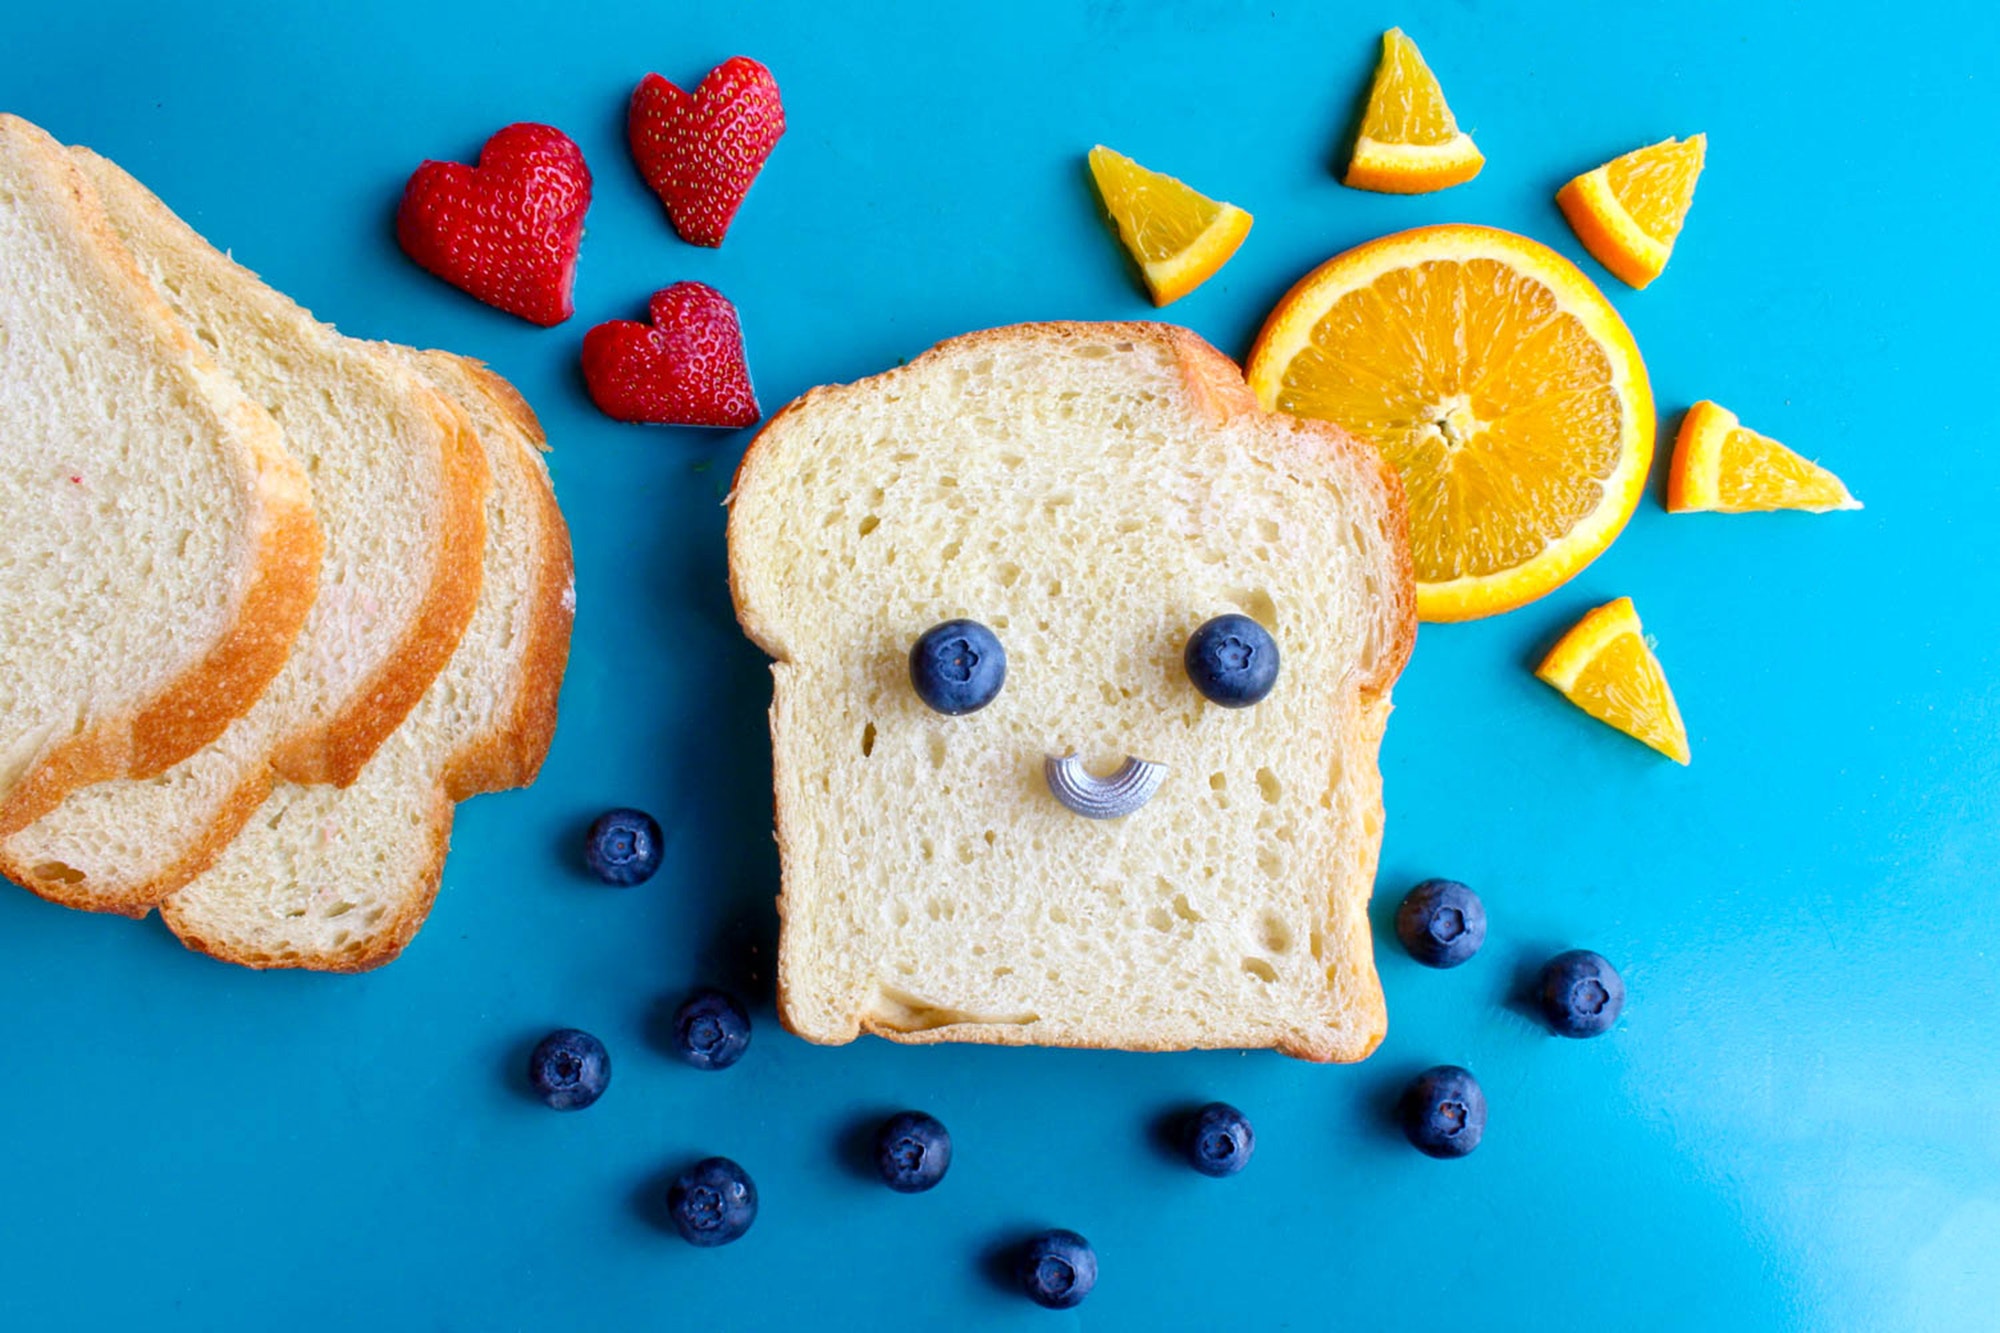 Loaf of bread with fruit pieces